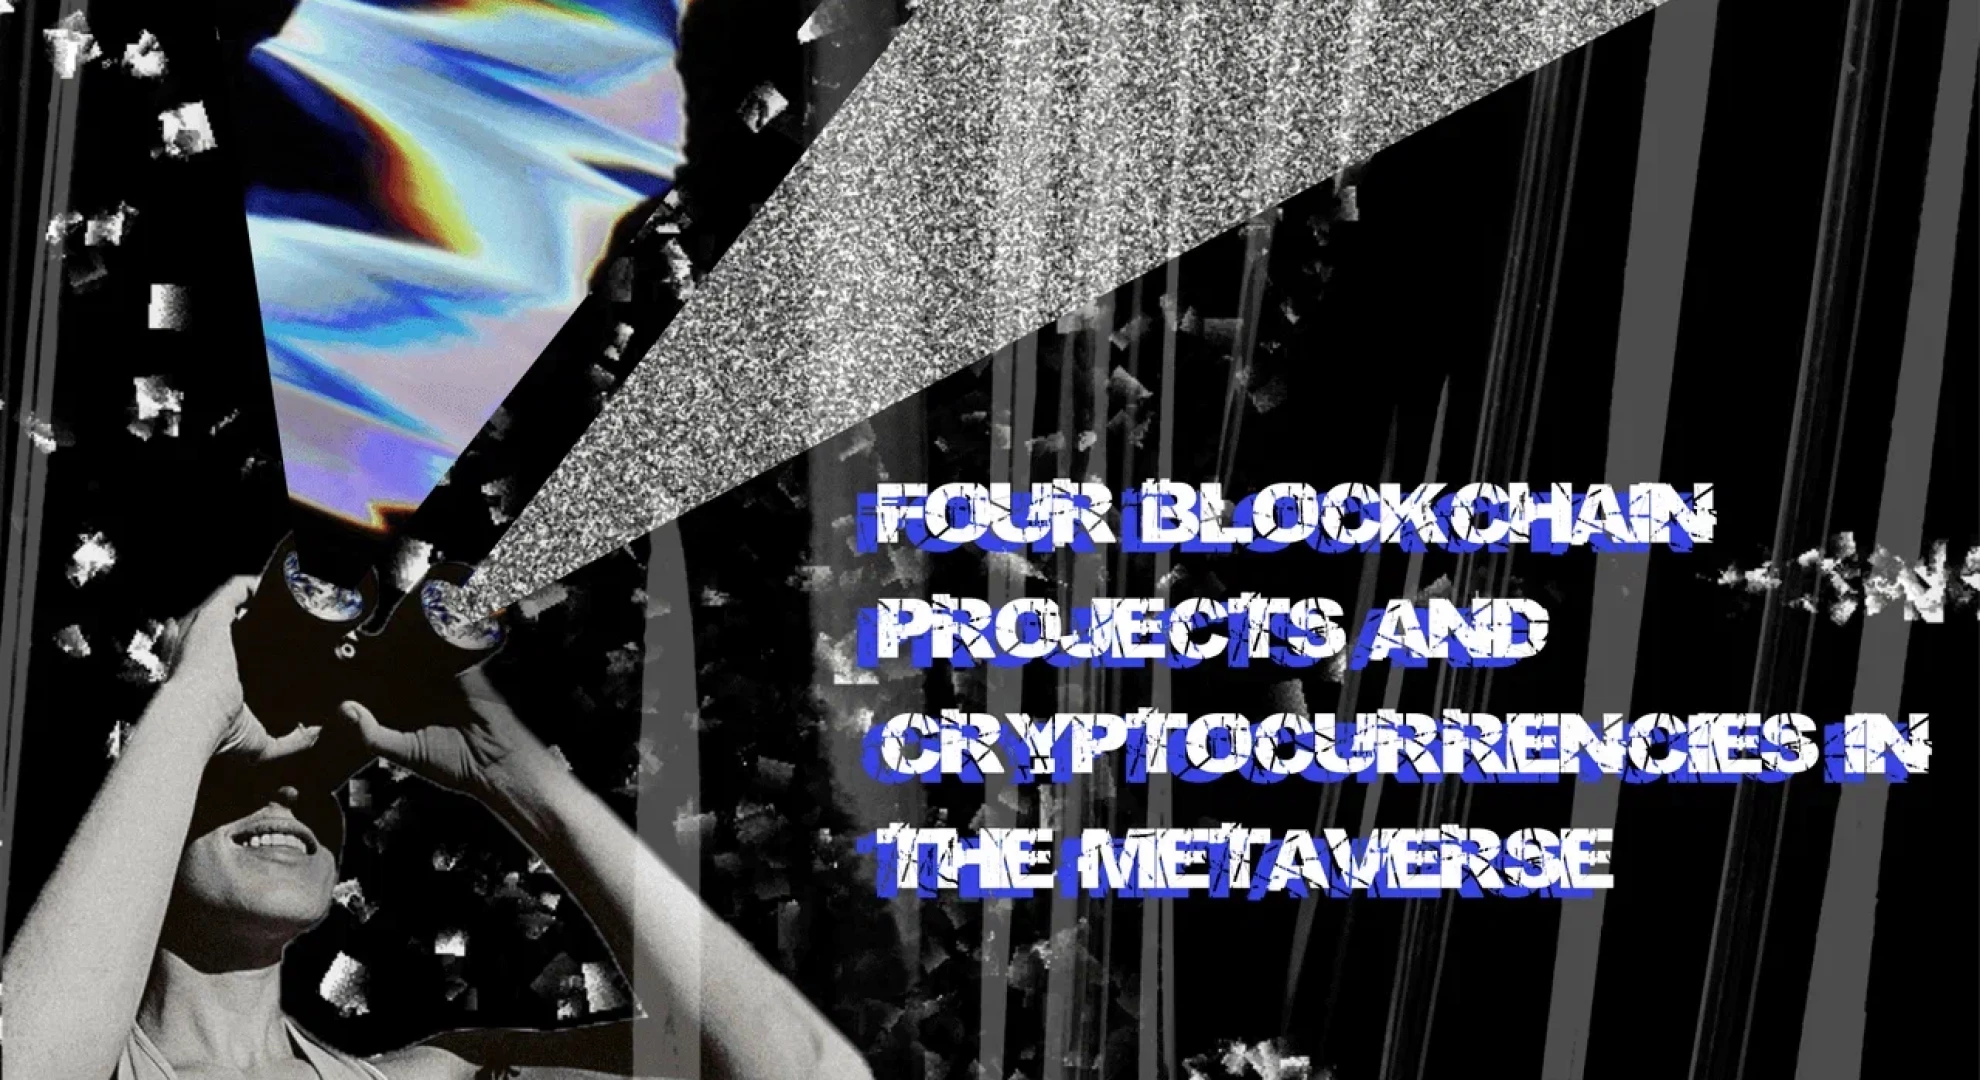 Four blockchain and cryptocurrency projects in the metaverse